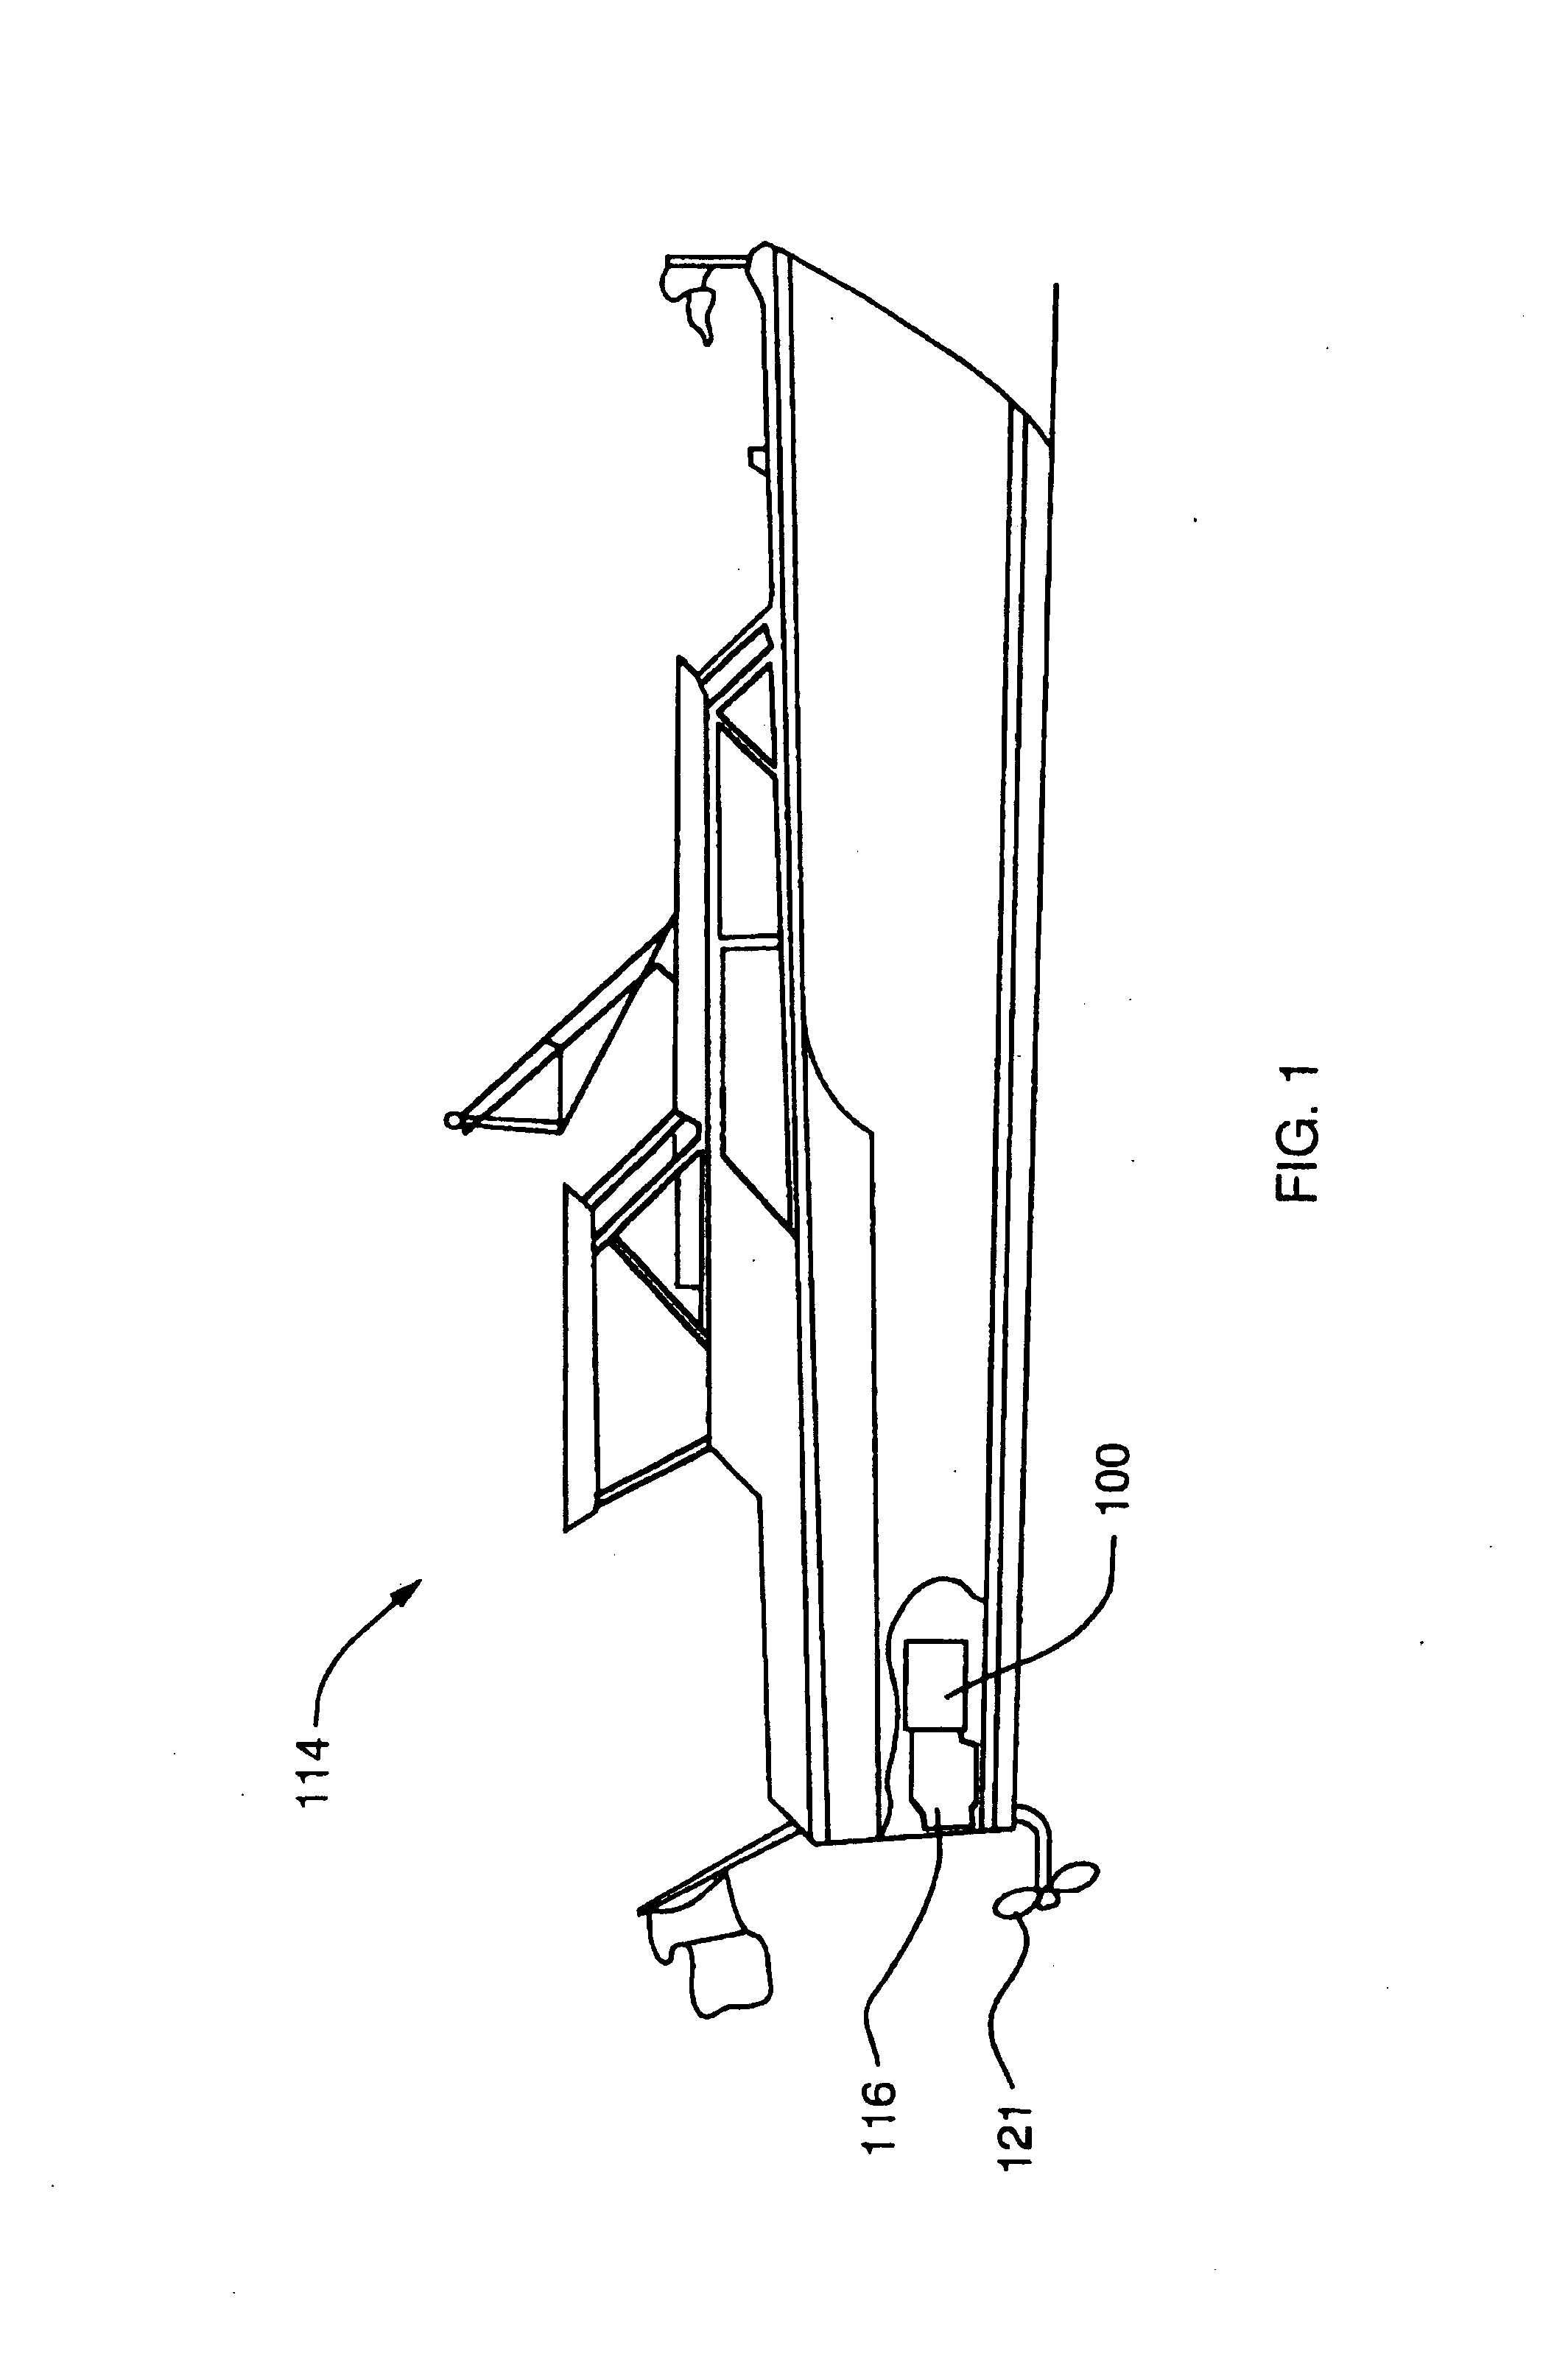 Fuel cell system with integrated fuel processor